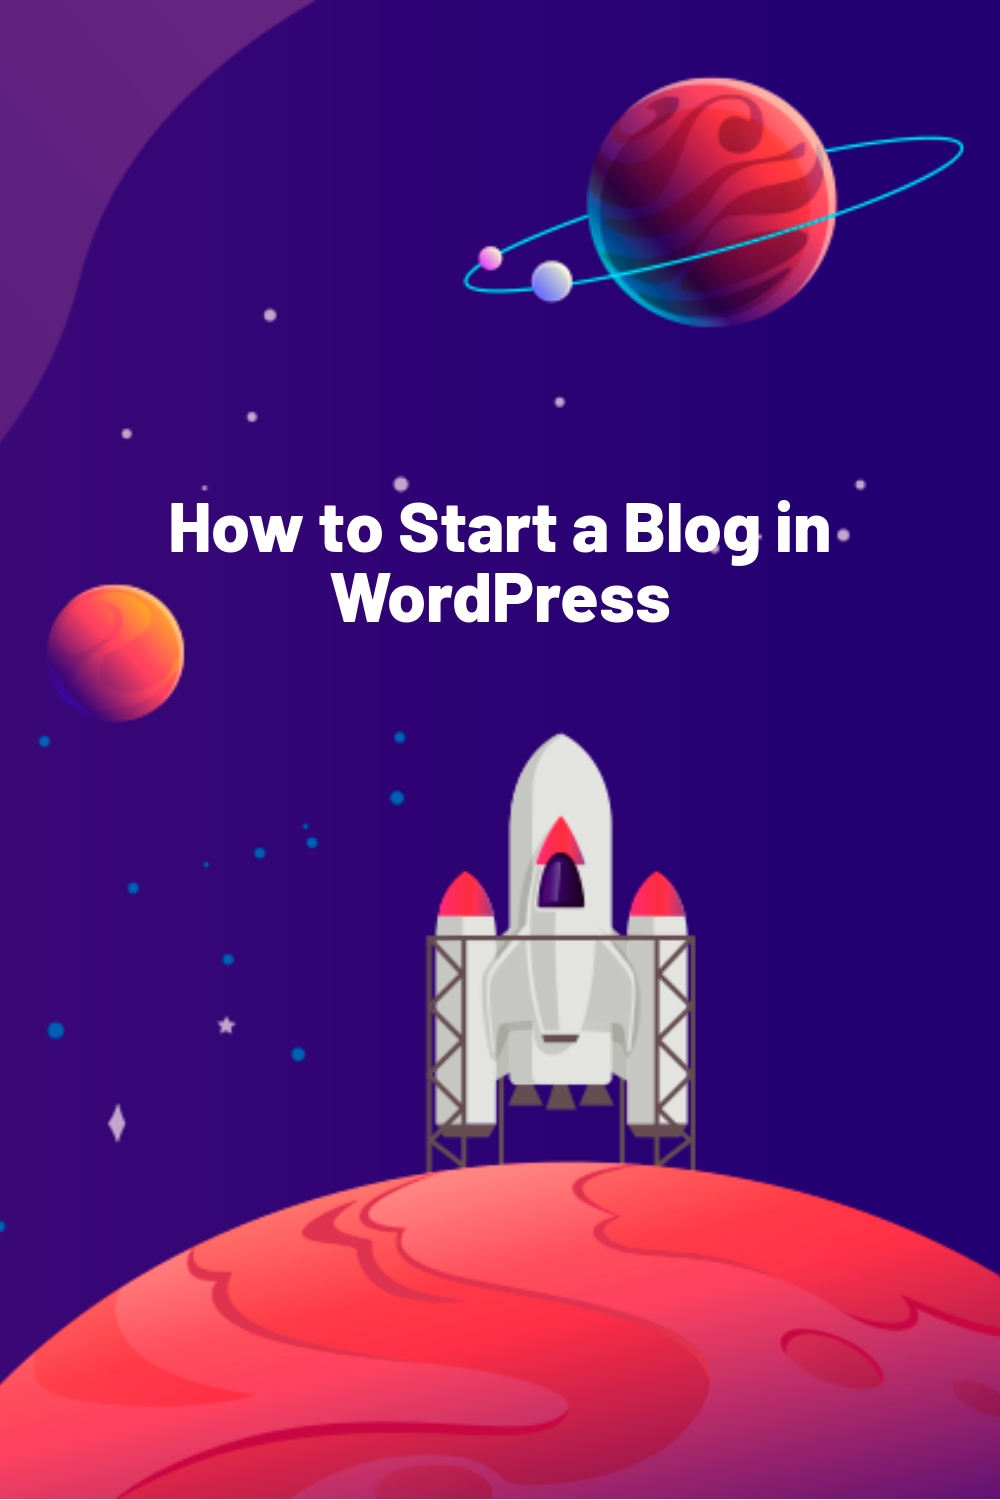 How to Start a Blog in WordPress